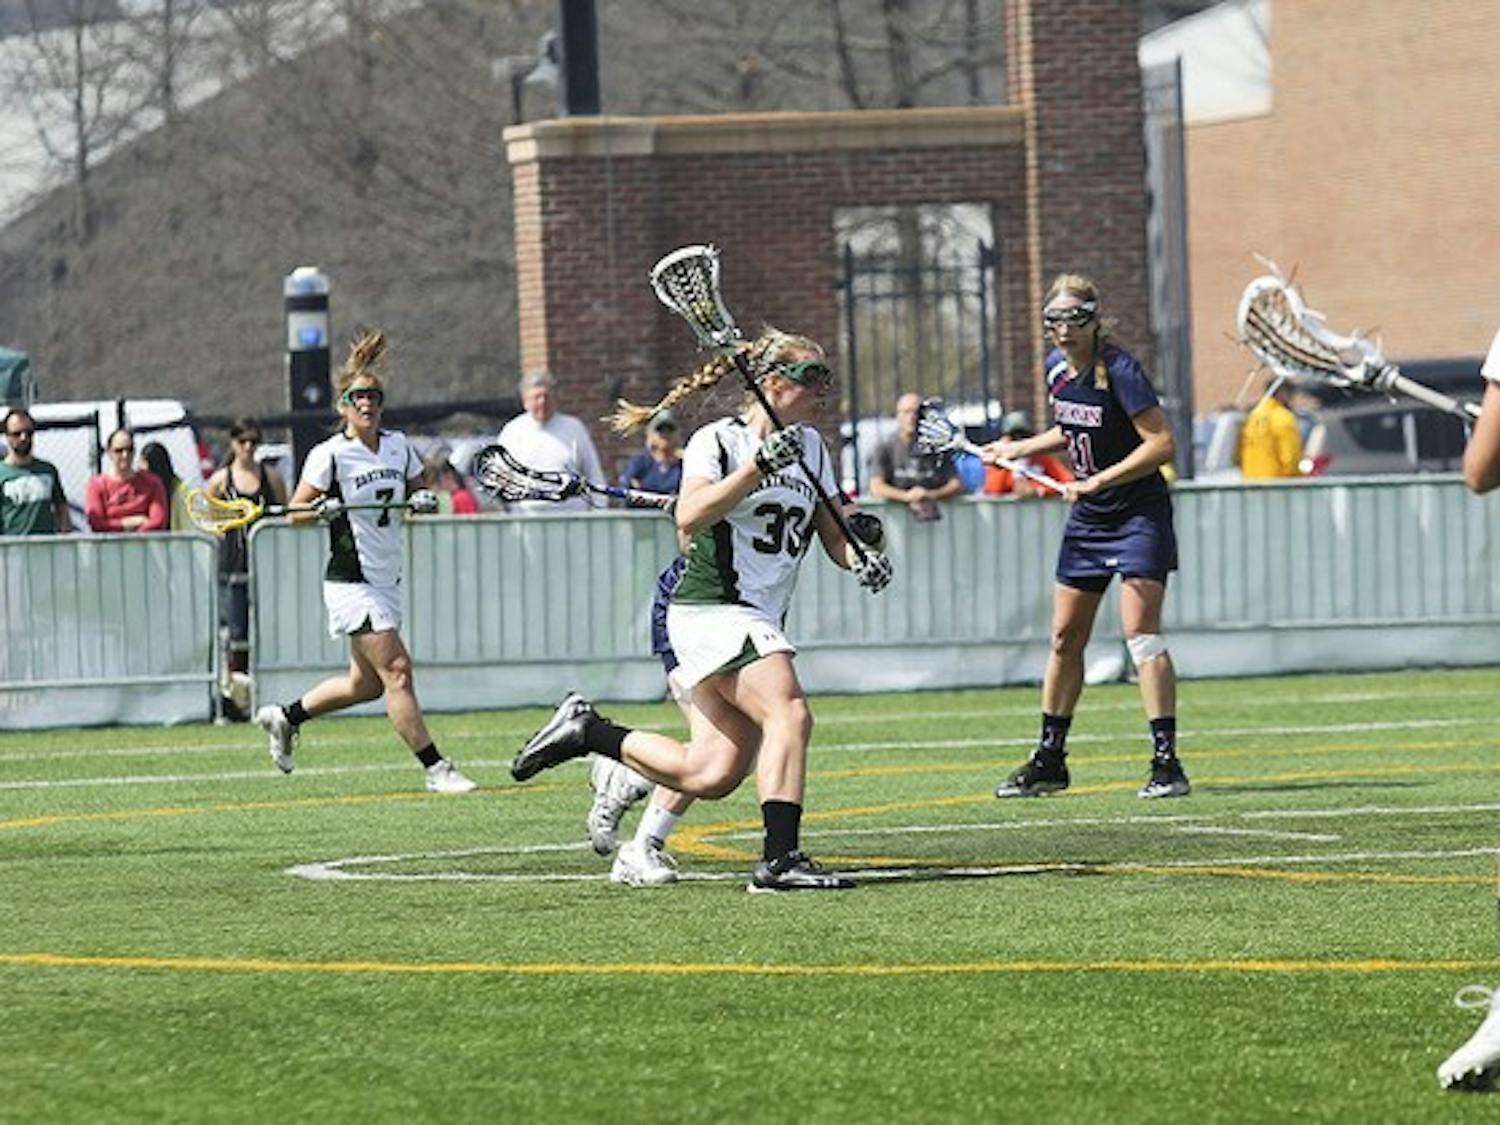 Bailey Johnson '14 and the Dartmouth women's lacrosse team defeated Penn twice this season en route to the Ivy League title.